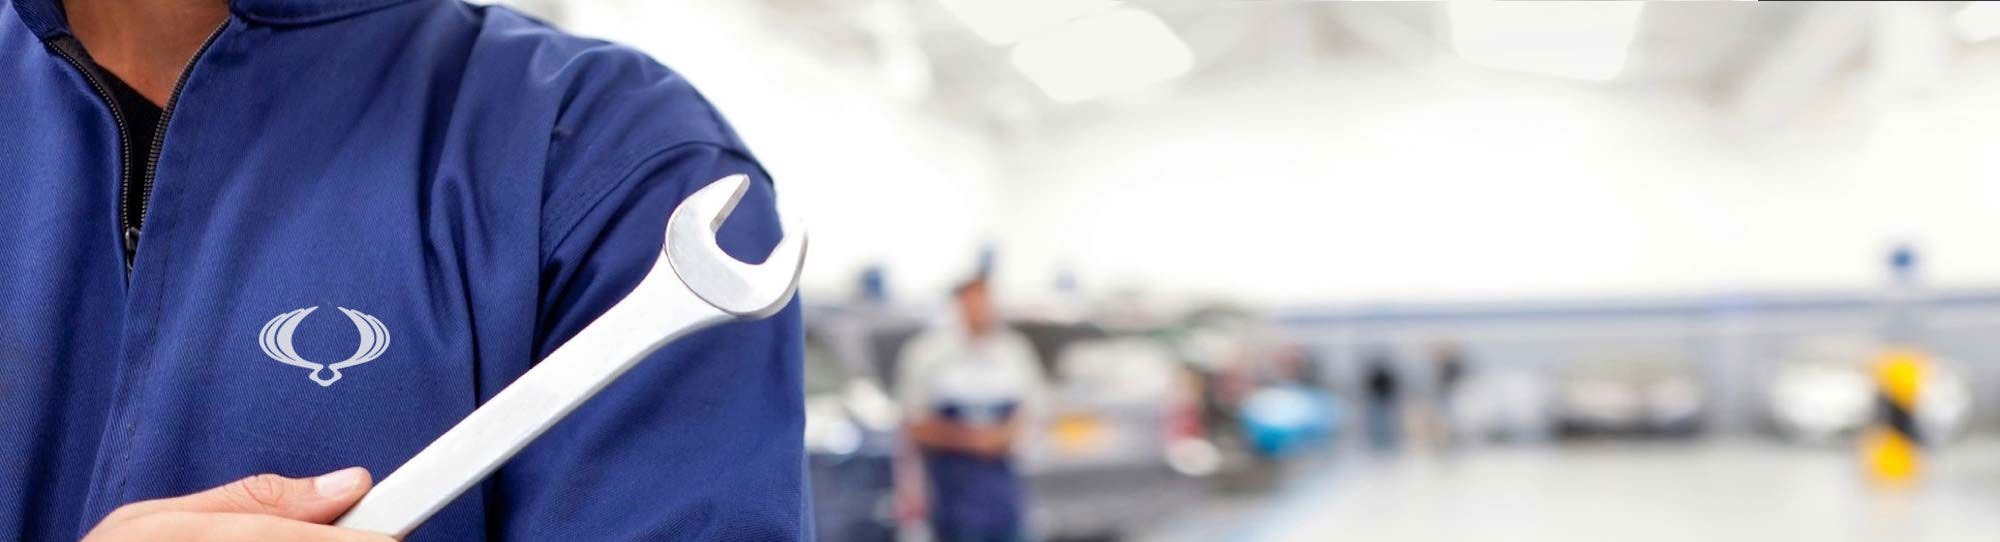 VEHICLE SERVICING IN LANCASHIRE